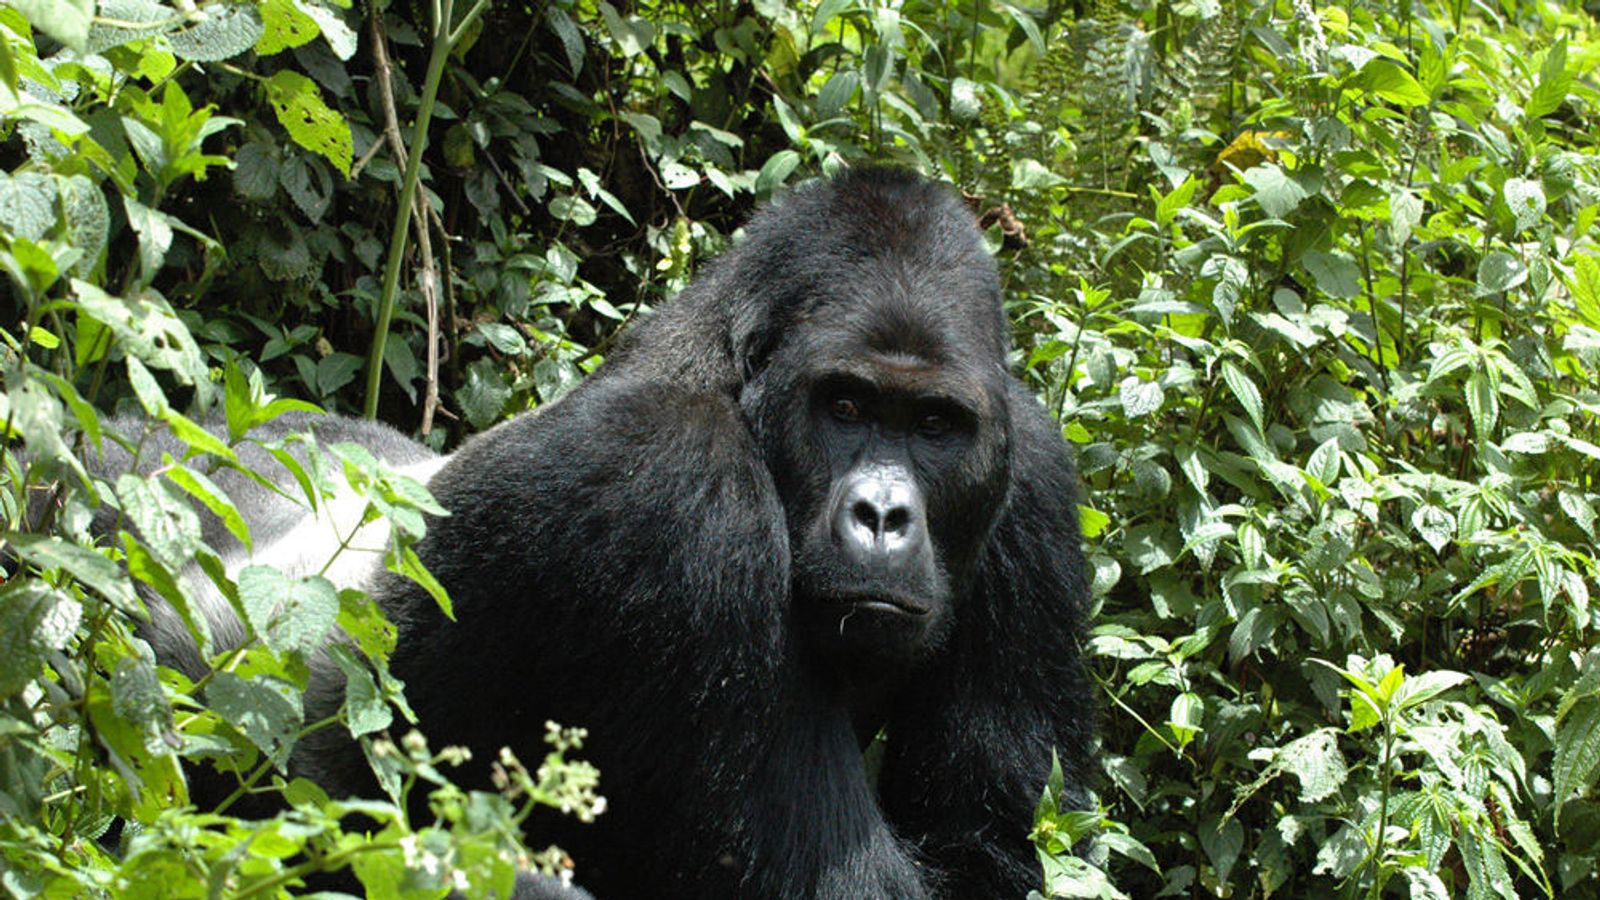 Eastern Gorillas Classified As 'Endangered' On Red List